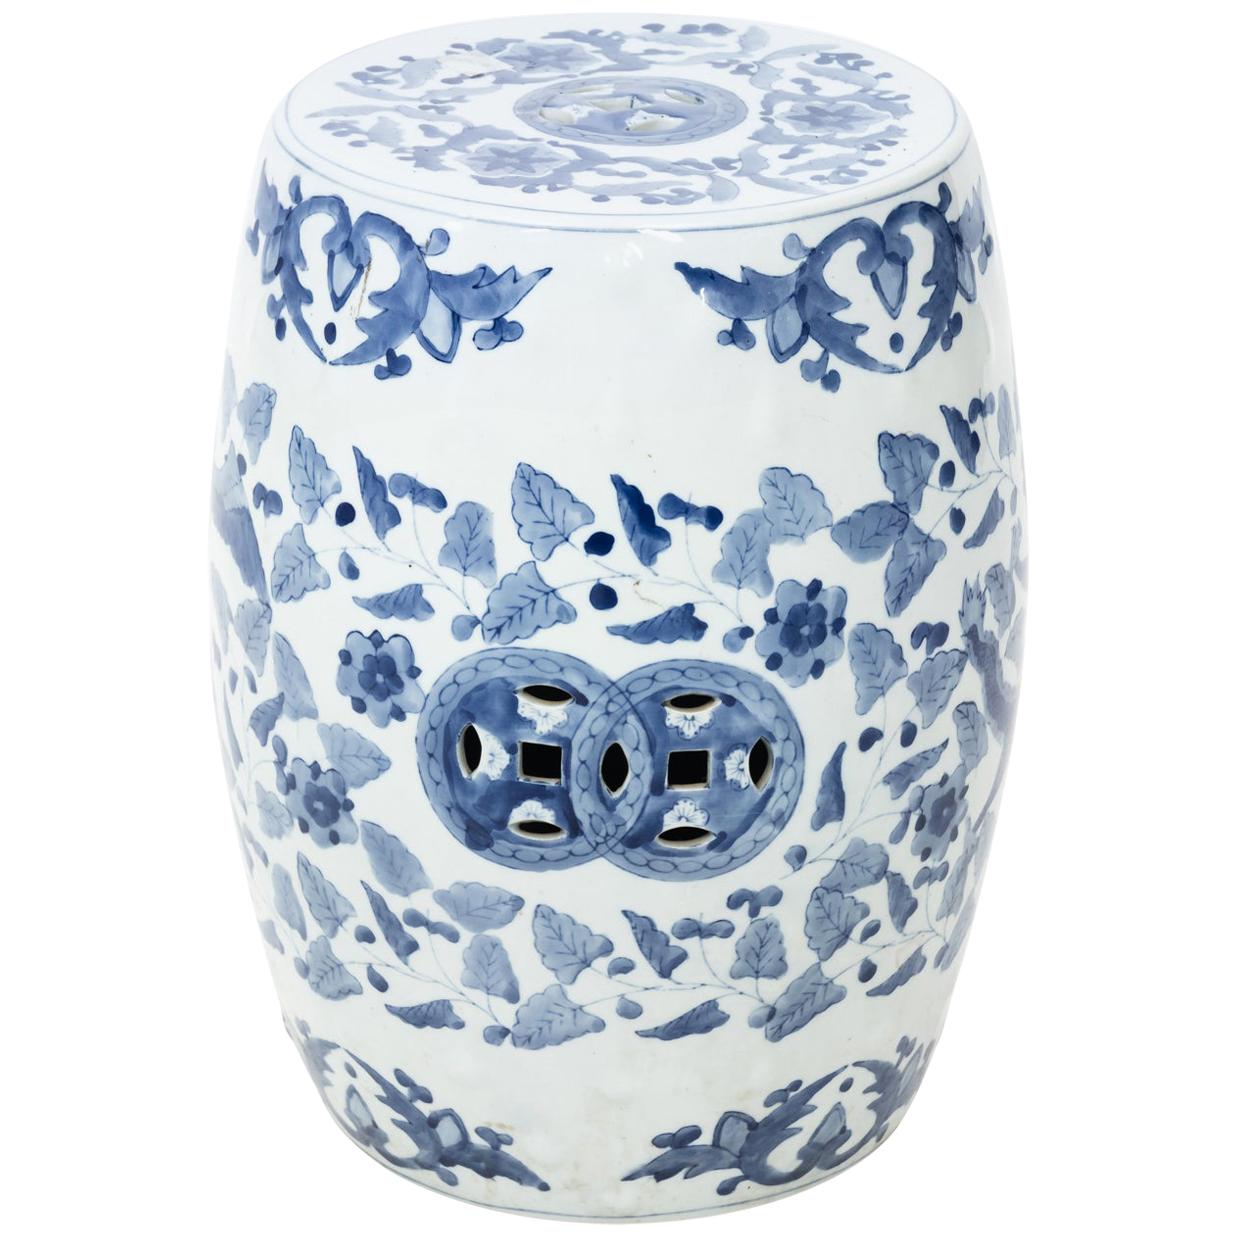 Blue and White Chinese Porcelain Garden Seat with Phoenix Motif